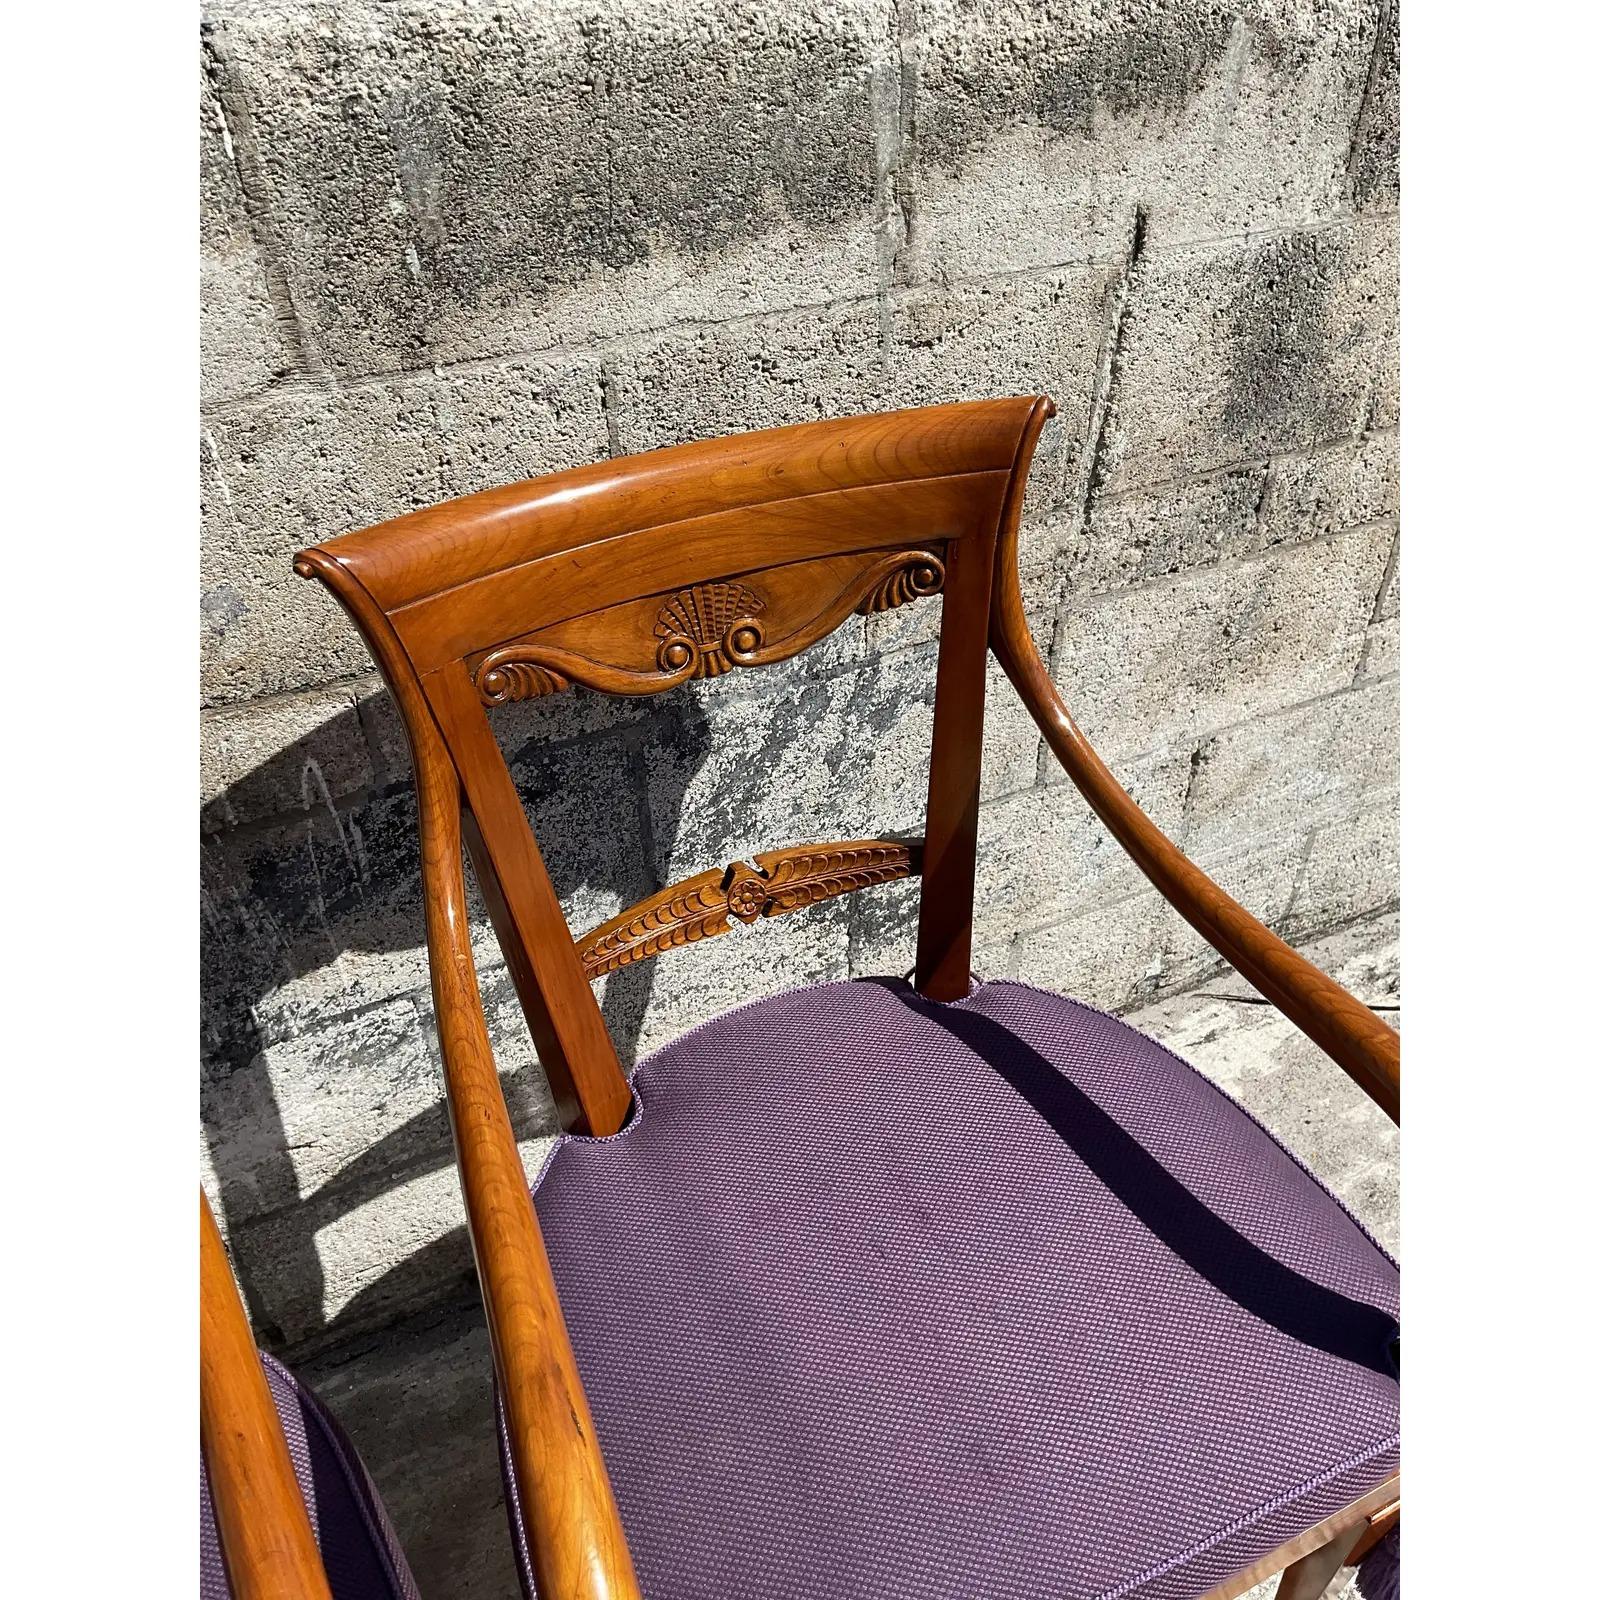 A stunning pair of vintage custom built arm chairs. Hand made by the prestigious KPS group in Italy. Beautiful warm wood with hand carved detail. Inset cane panel with custom upholstery in rich purple. Acquired from an immaculate Naples estate.